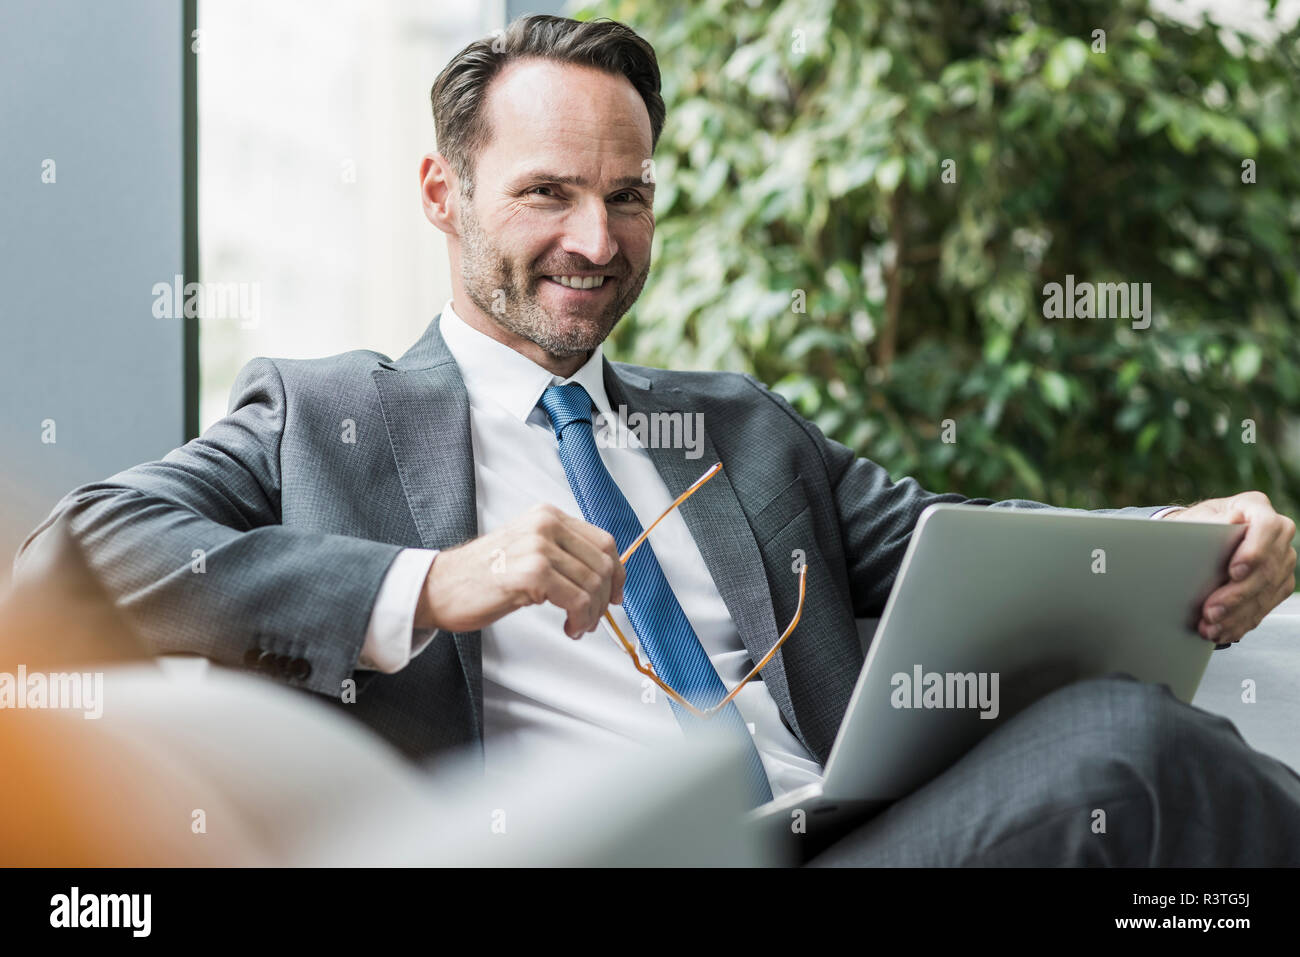 Portrait of smiling businessman sitting in lobby with laptop Banque D'Images